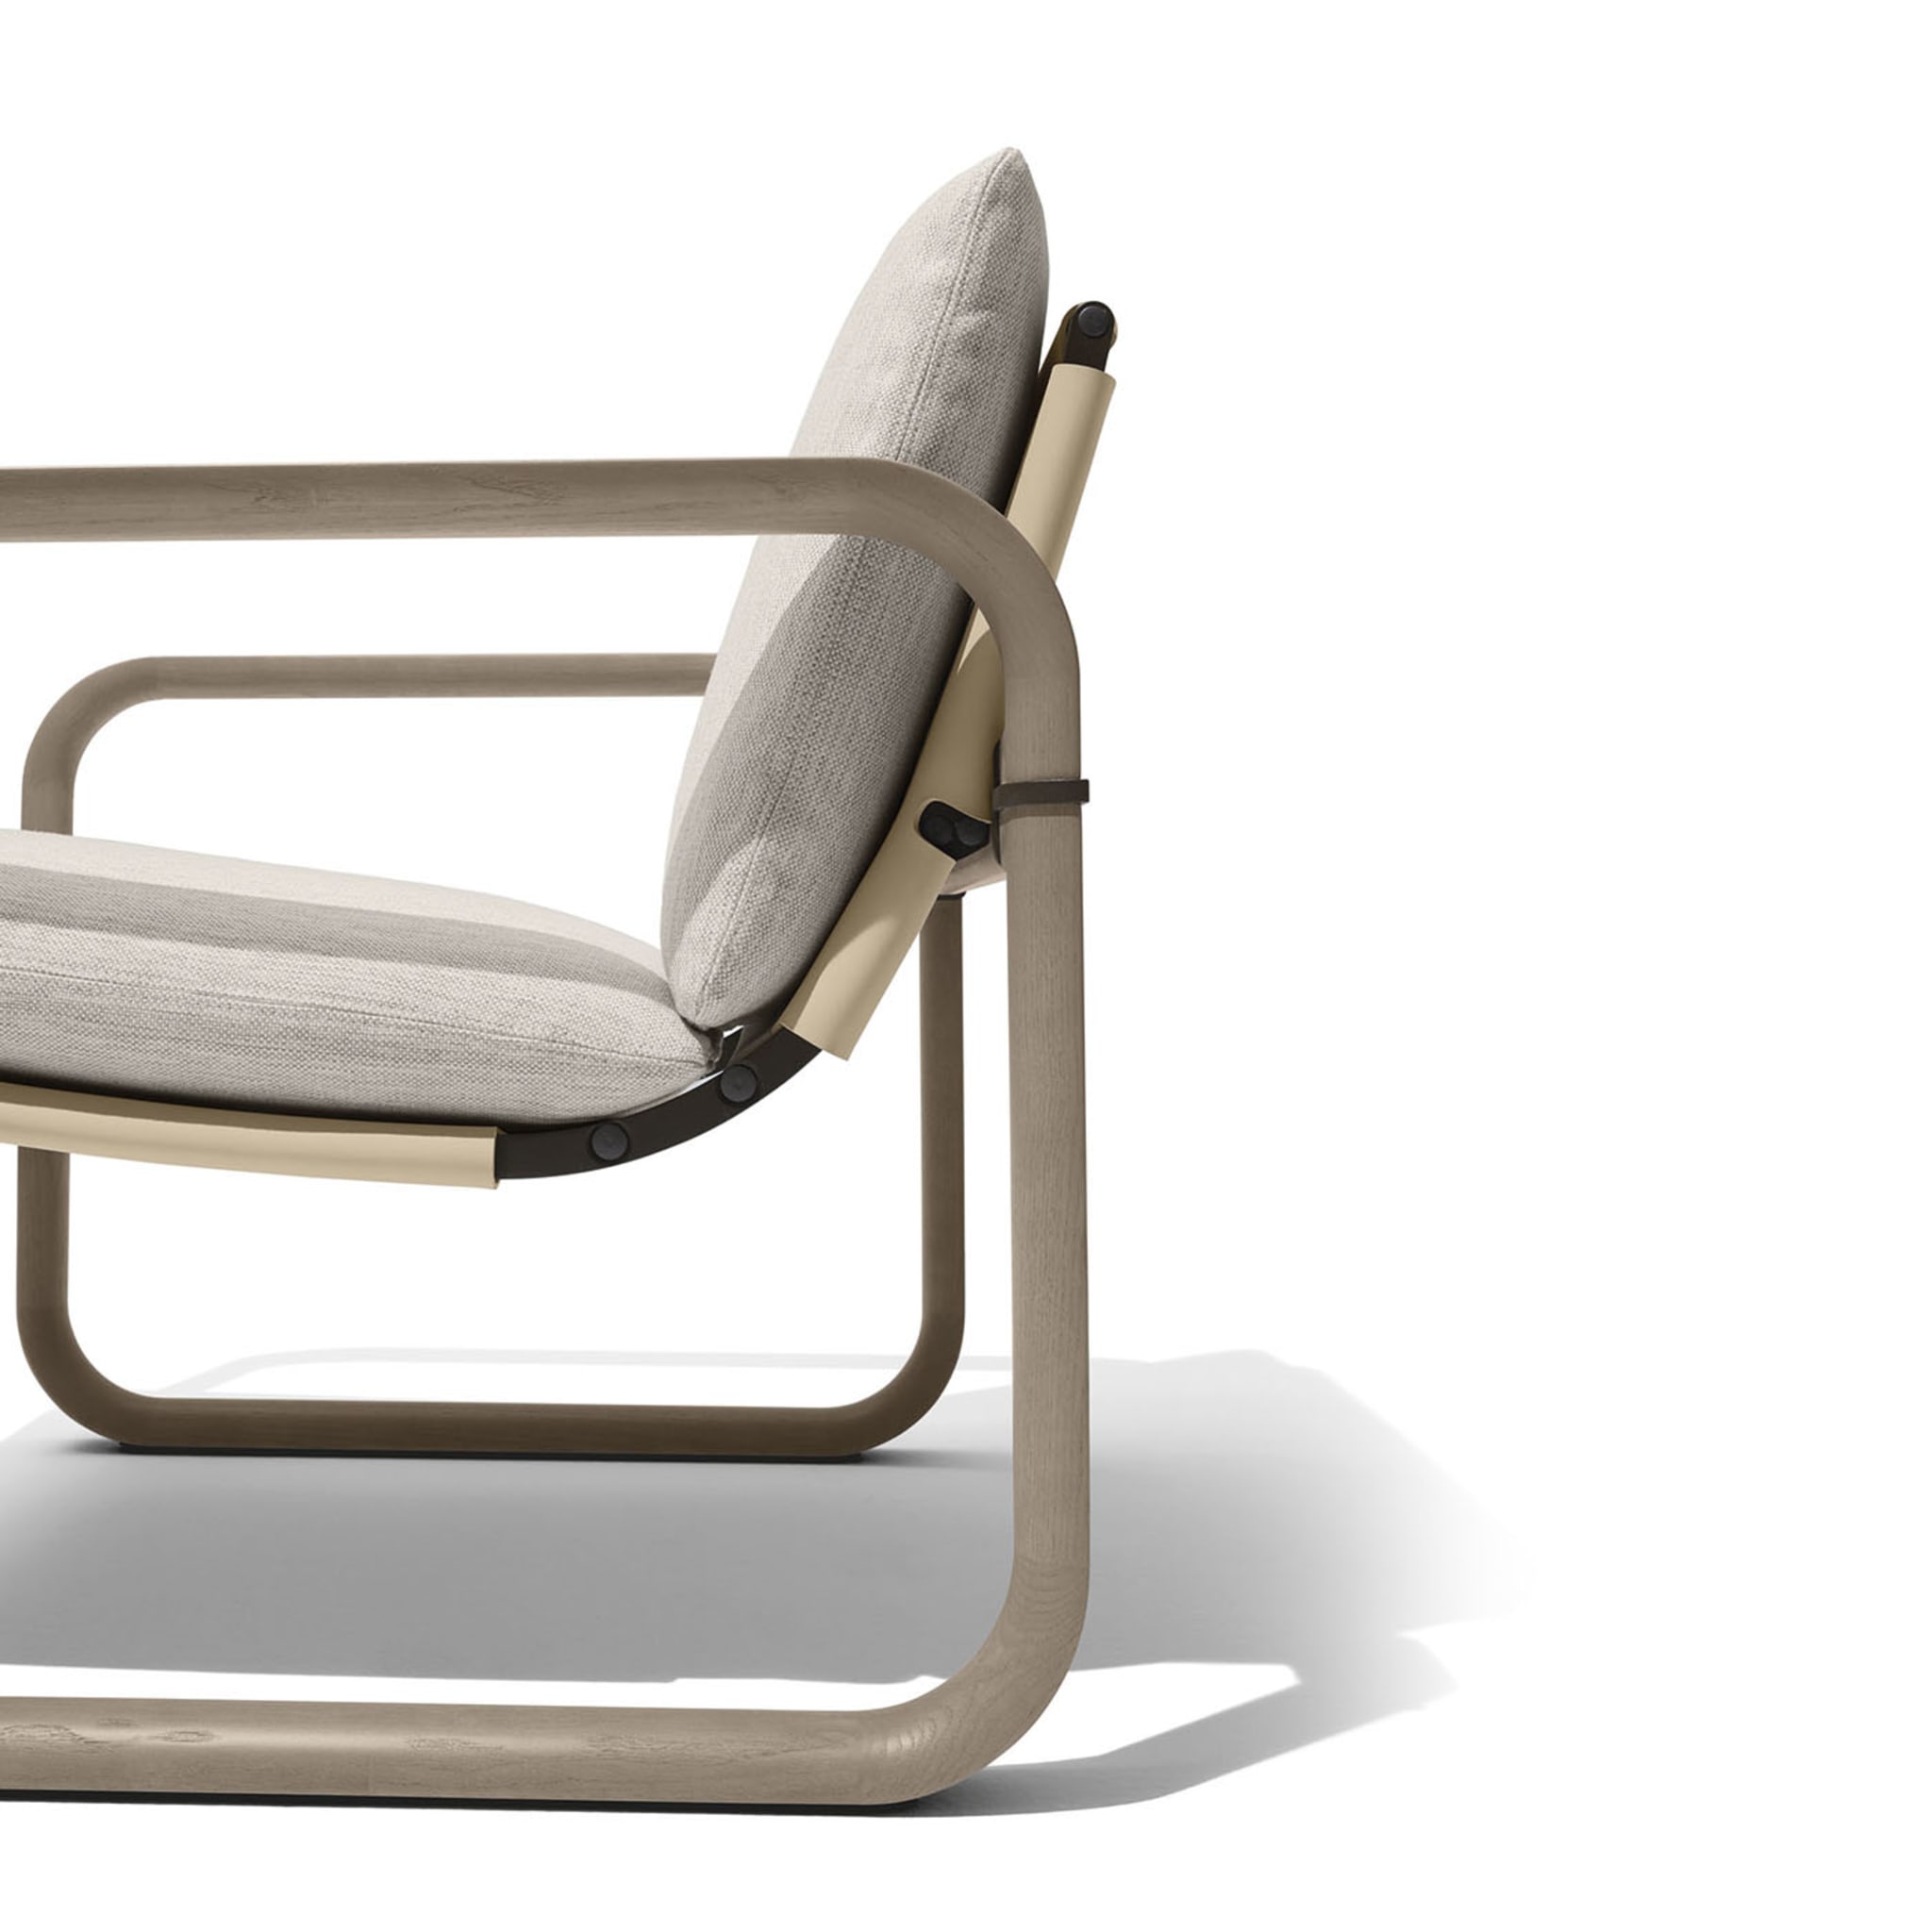 Loop Outdoor Lounge Chiar by Ludovica+Roberto Palomba - Alternative view 3